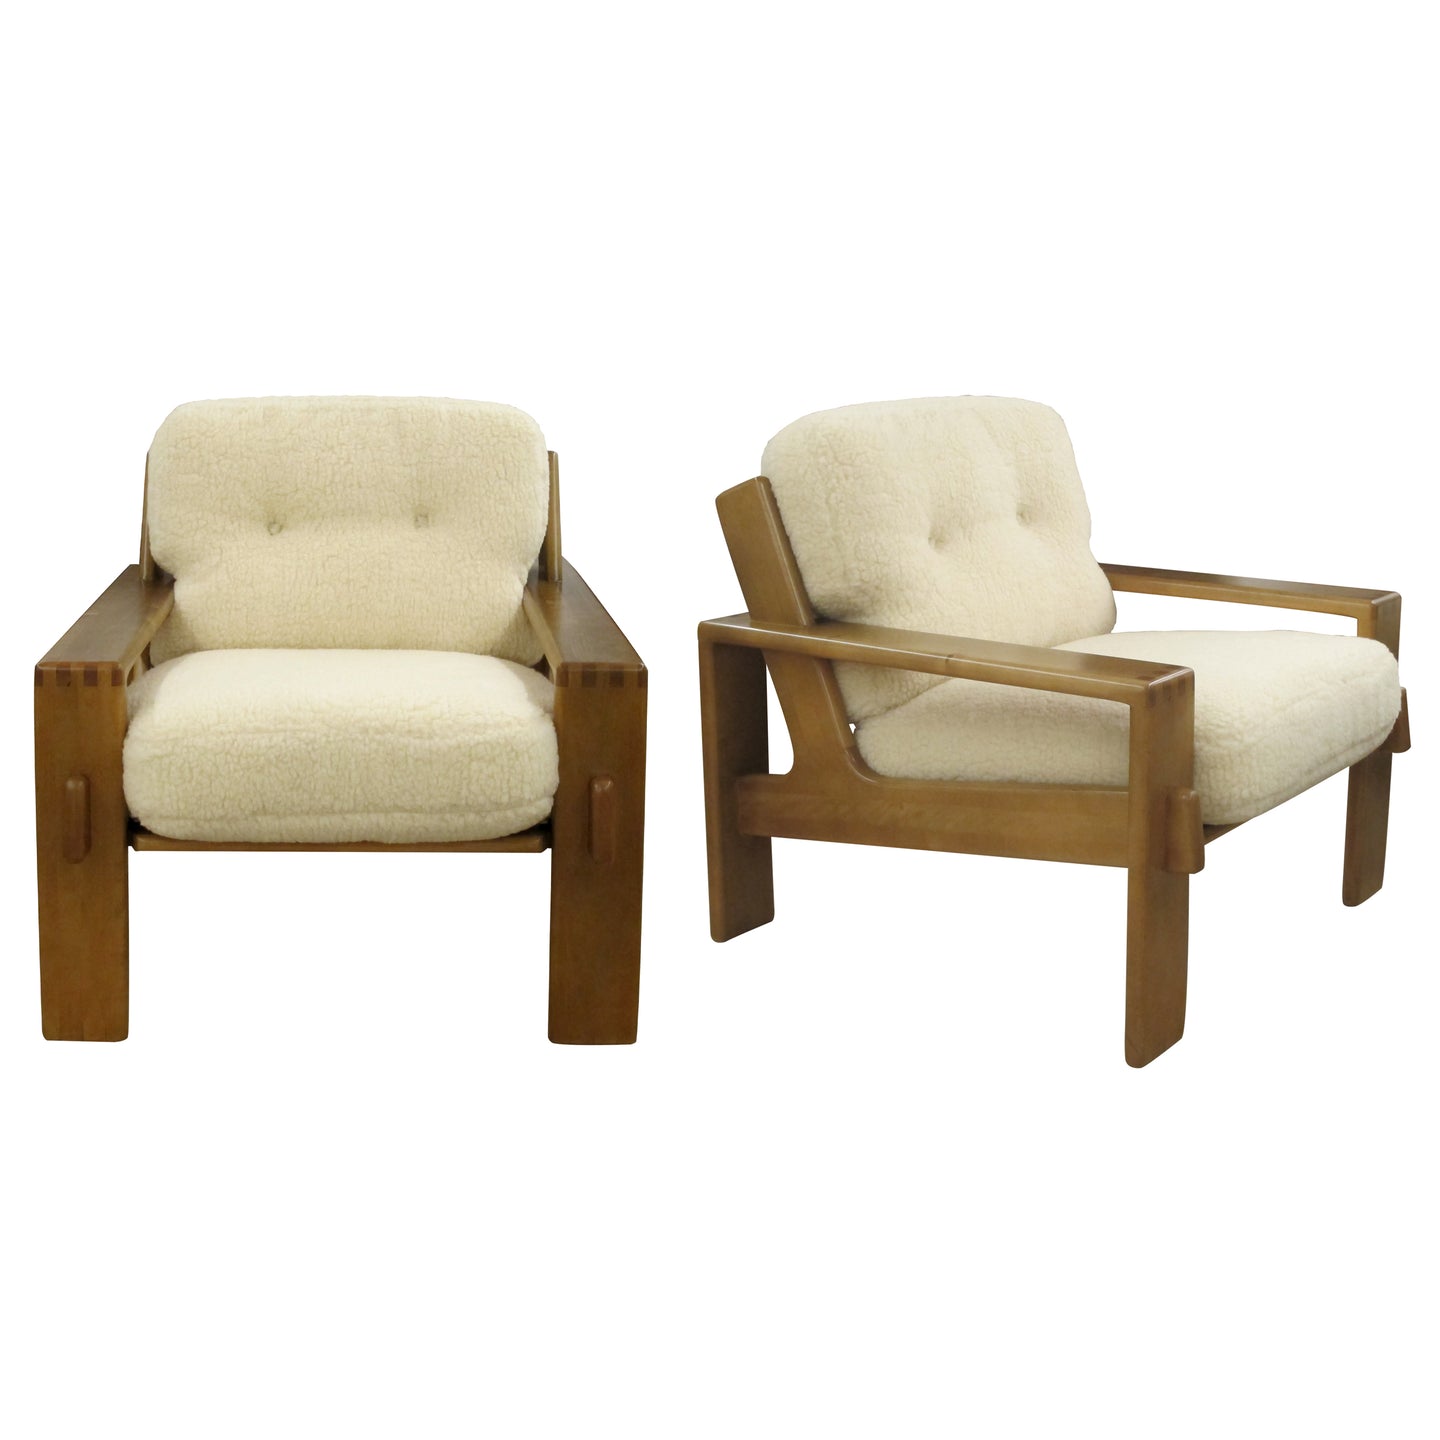 1970s Finnish Pair Of Armchairs With An Oak Frame